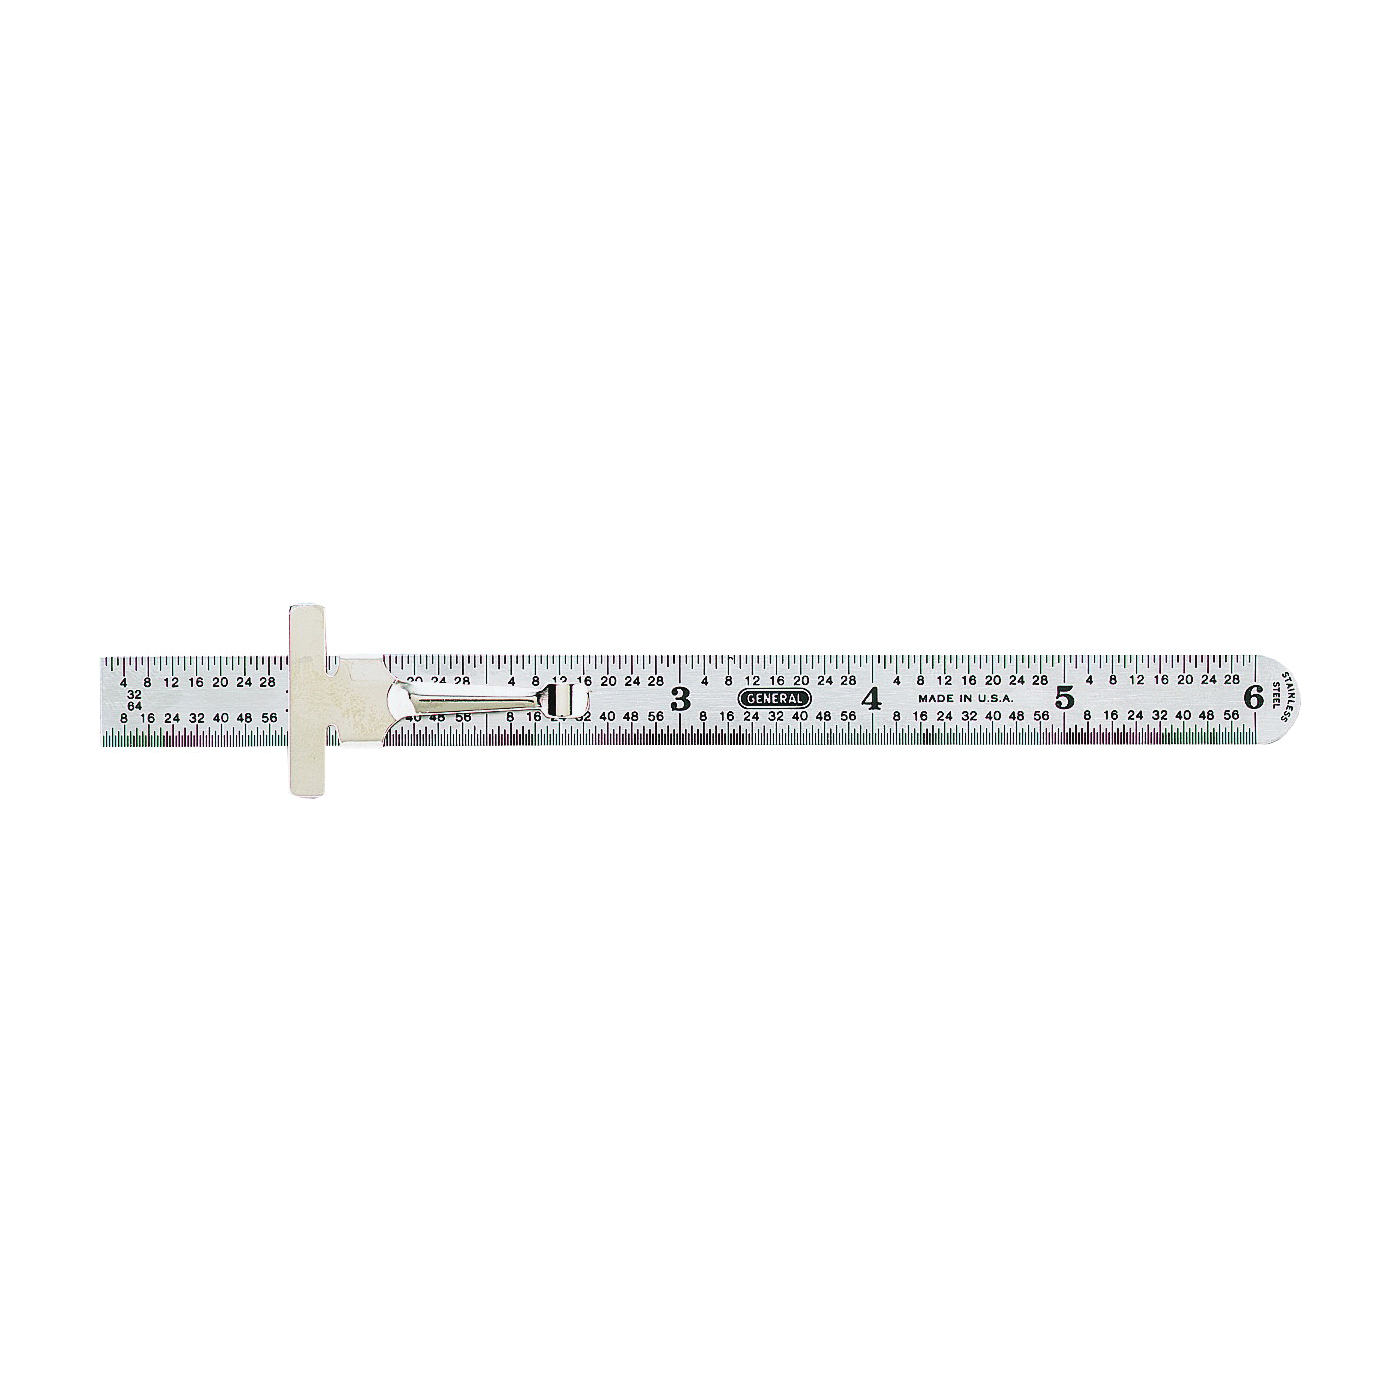 General 300/1 Precision Measuring Ruler, SAE Graduation, Stainless Steel, 3-7/8 in W - 1